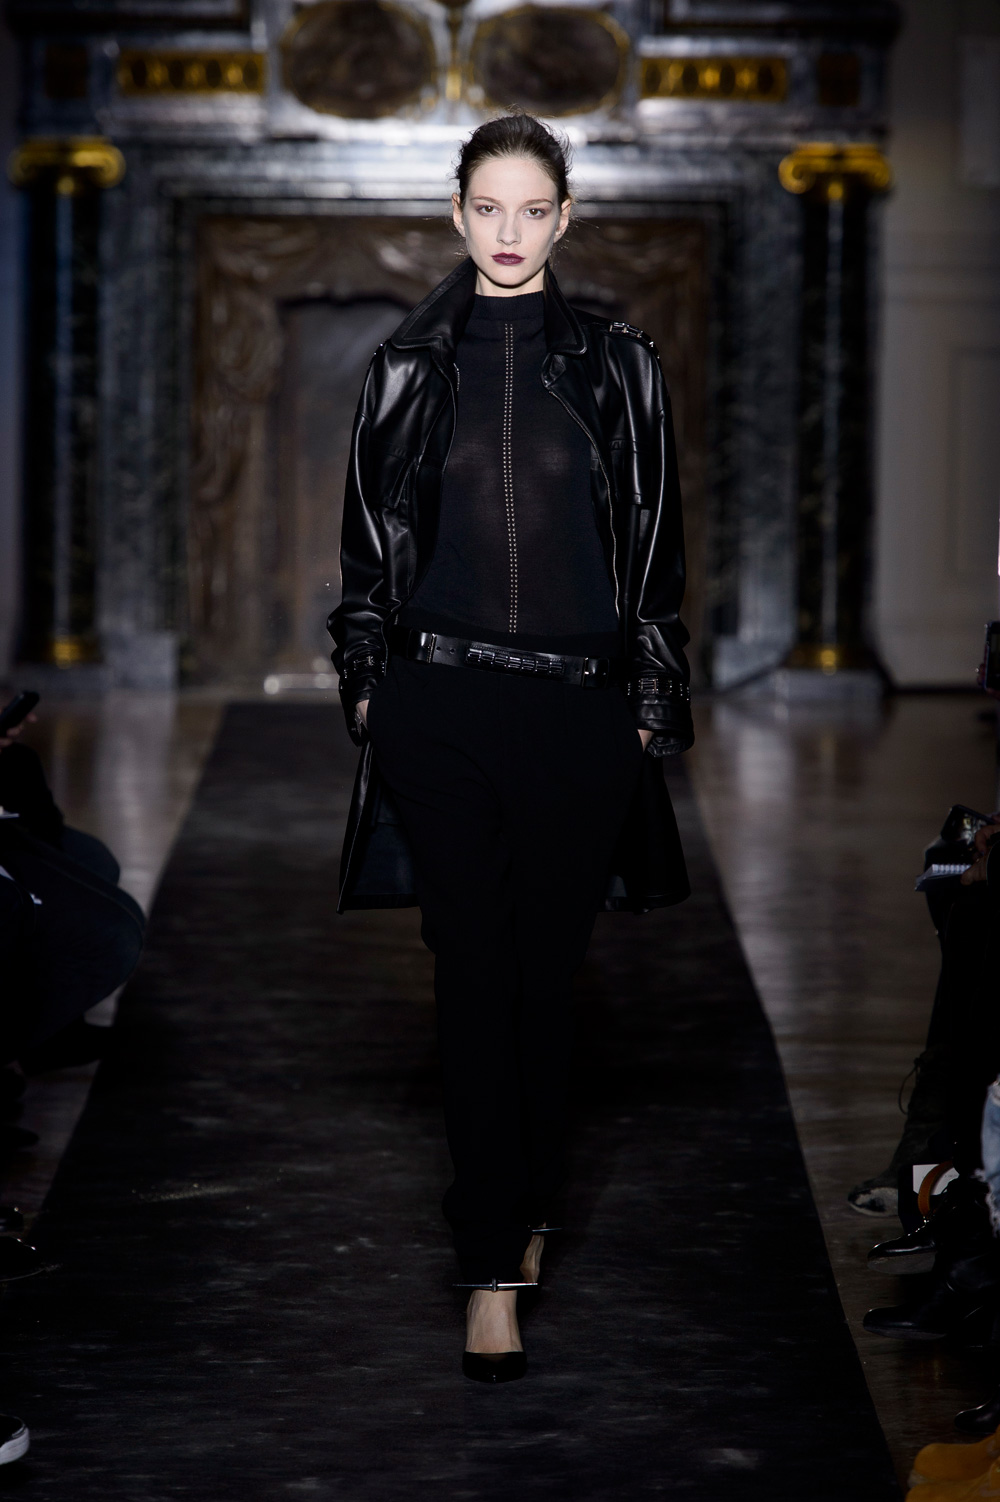 Anthony Vaccarello Fall Winter 2013.14 Womenswear Collection